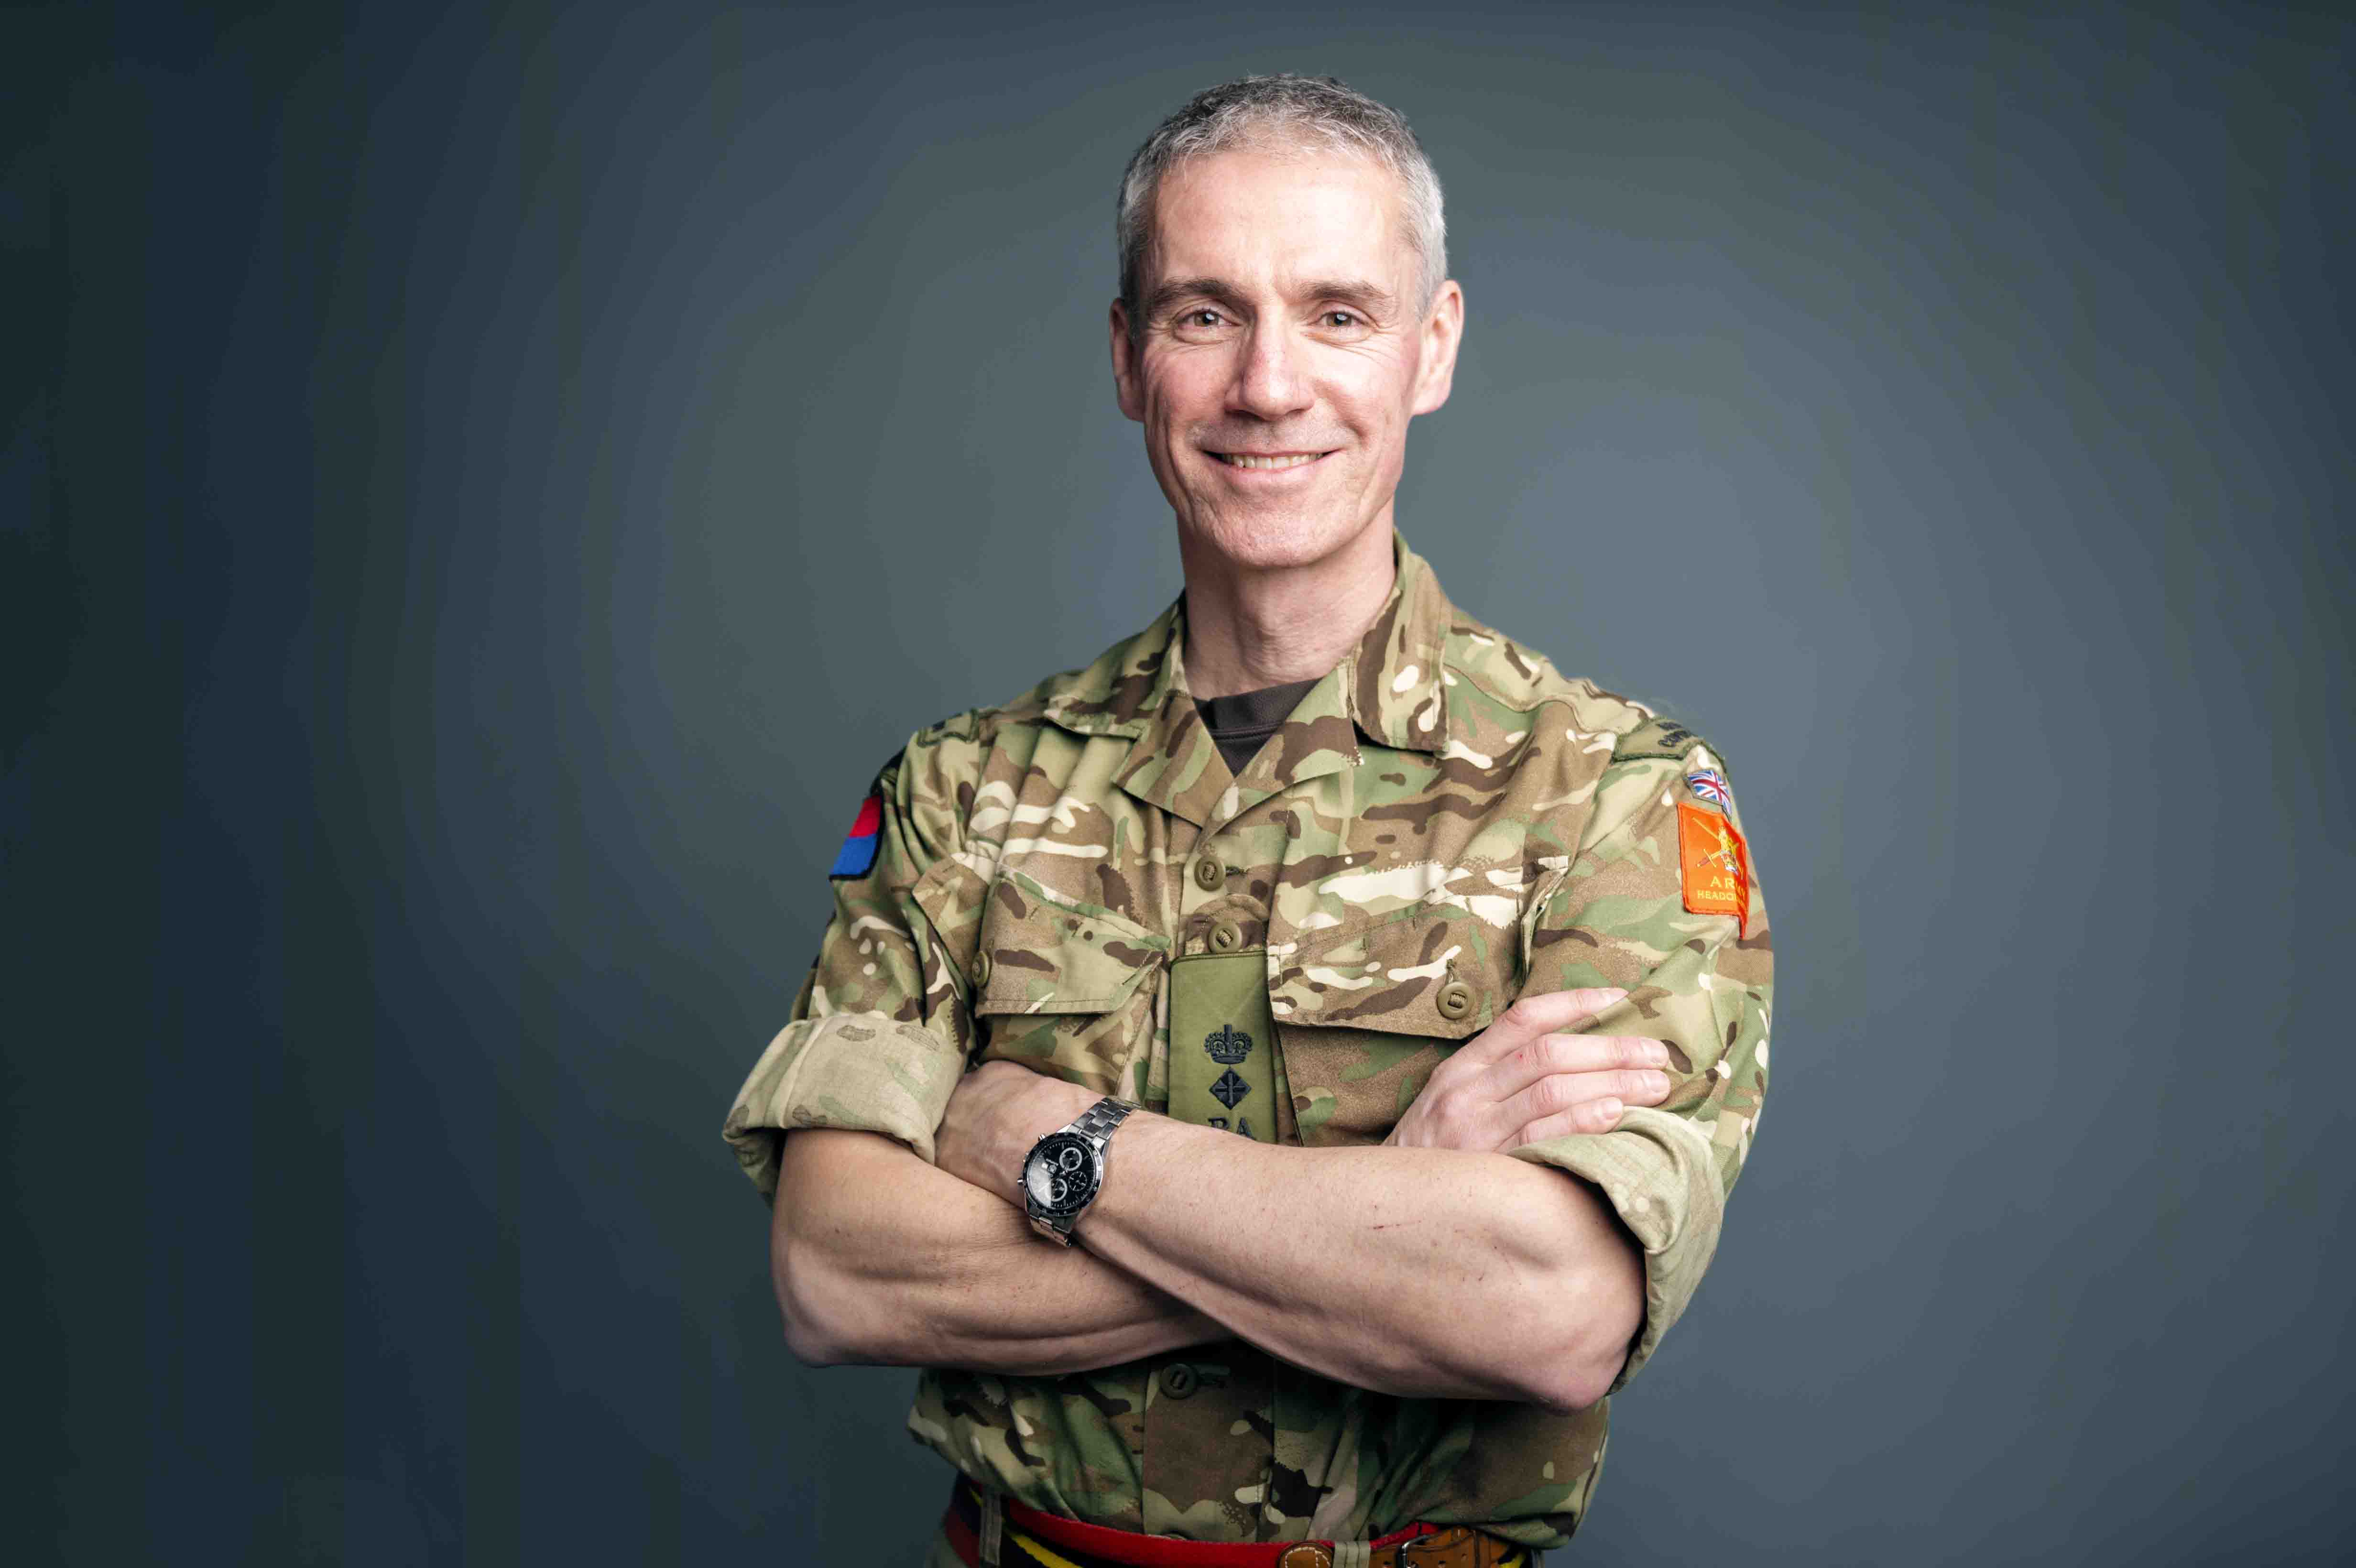 A male soldier with grey hair smiles at the camera in uniform with his arms folded